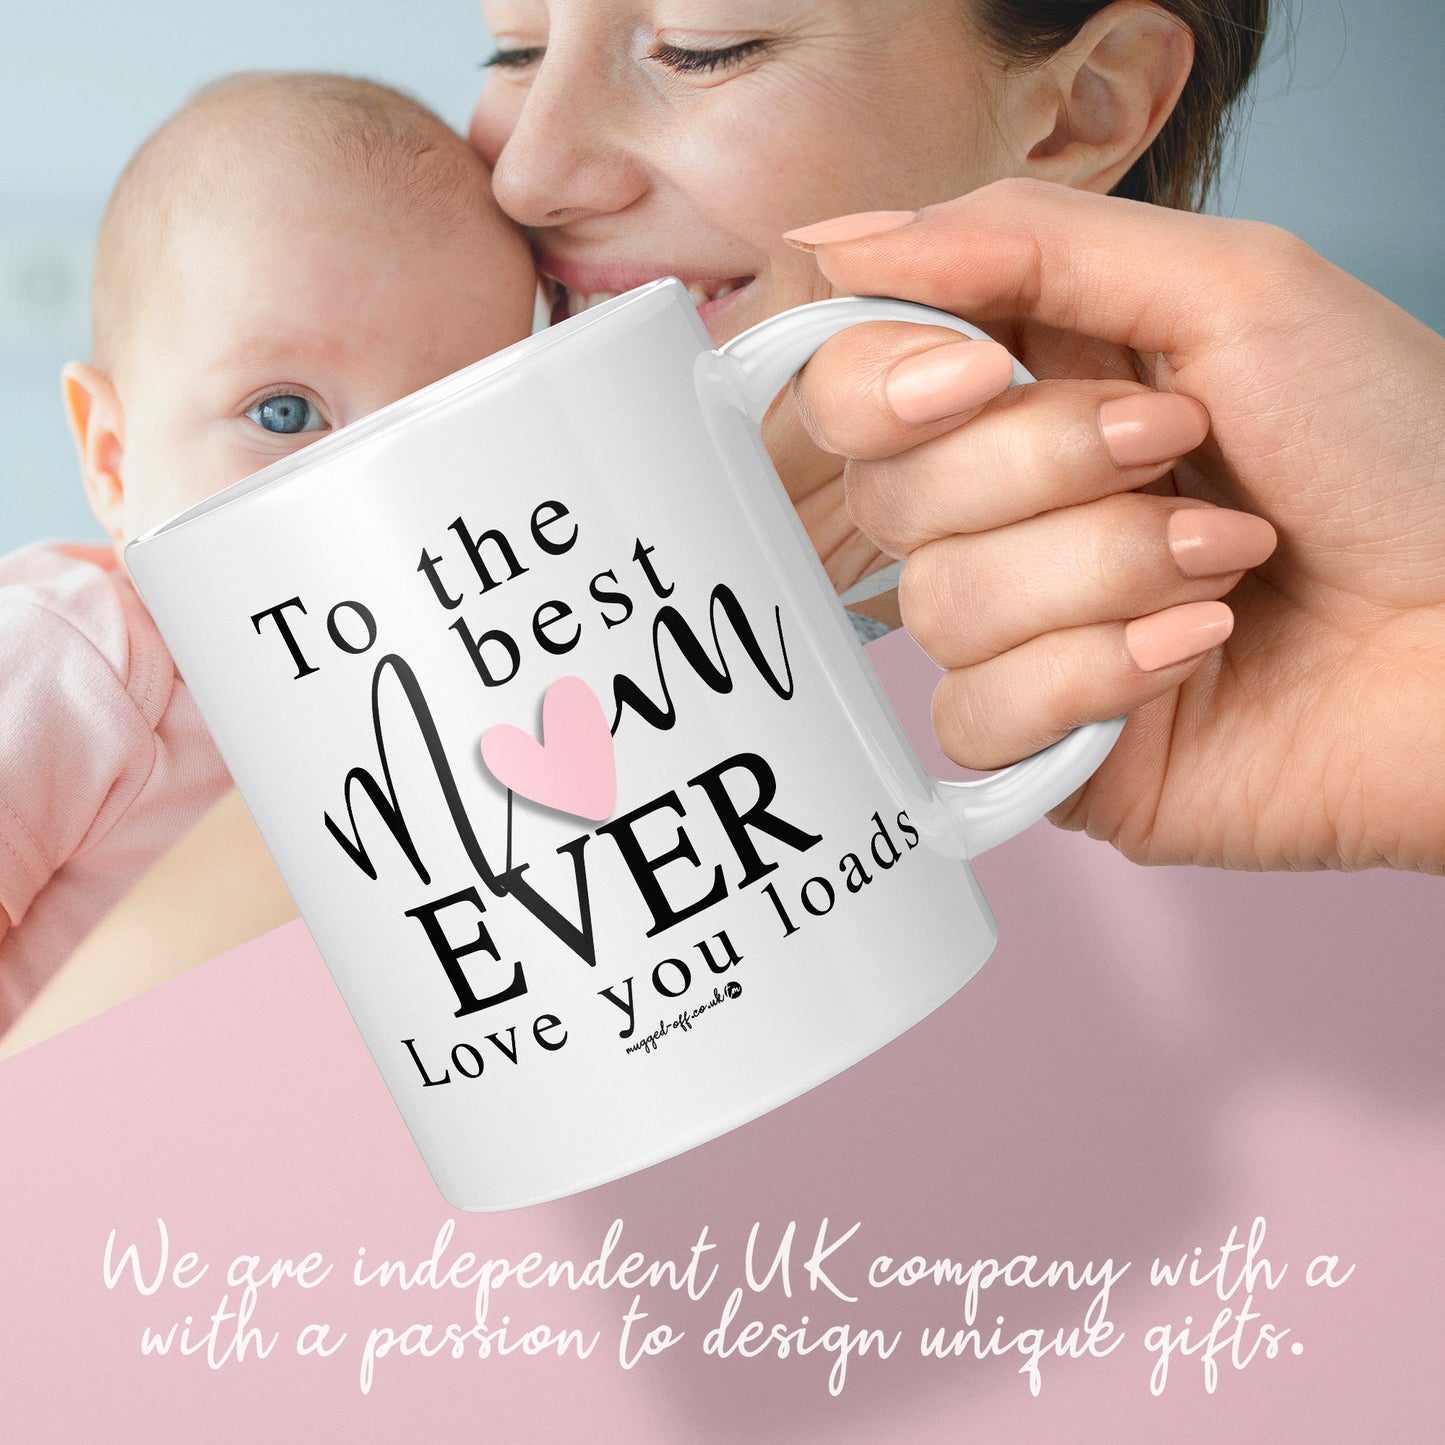 Best Mum Ever Gift Mother's Day Birthday Or Any Occasion Mom Mug Mam